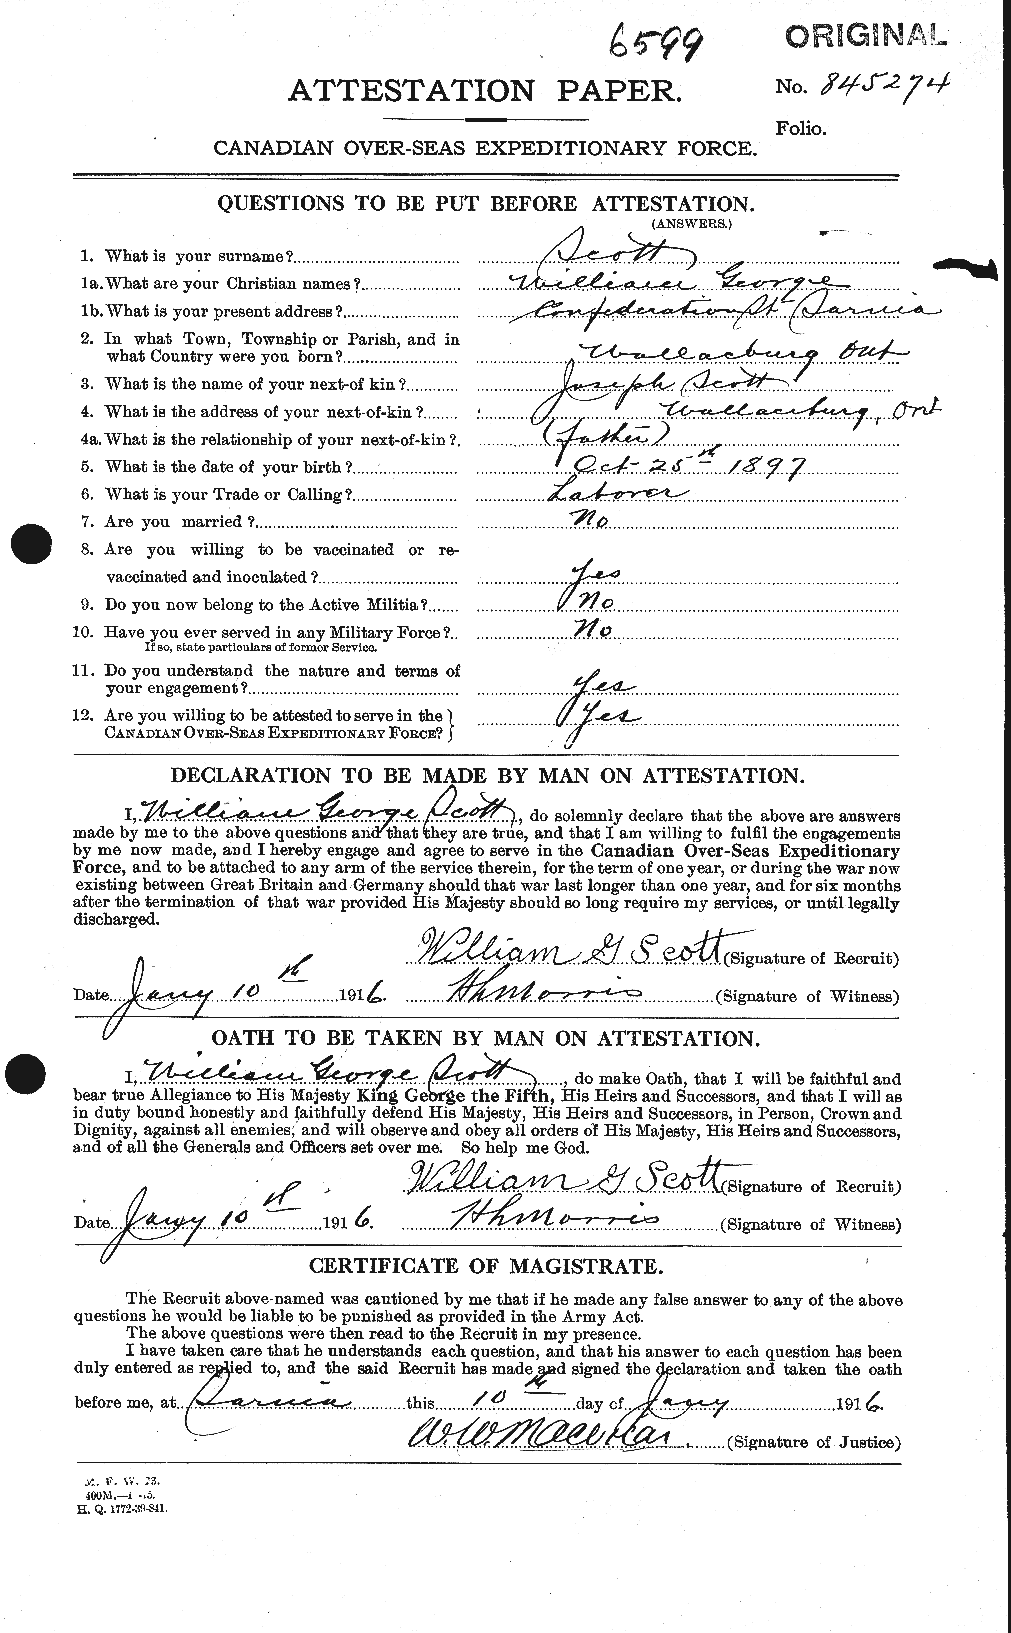 Personnel Records of the First World War - CEF 087018a